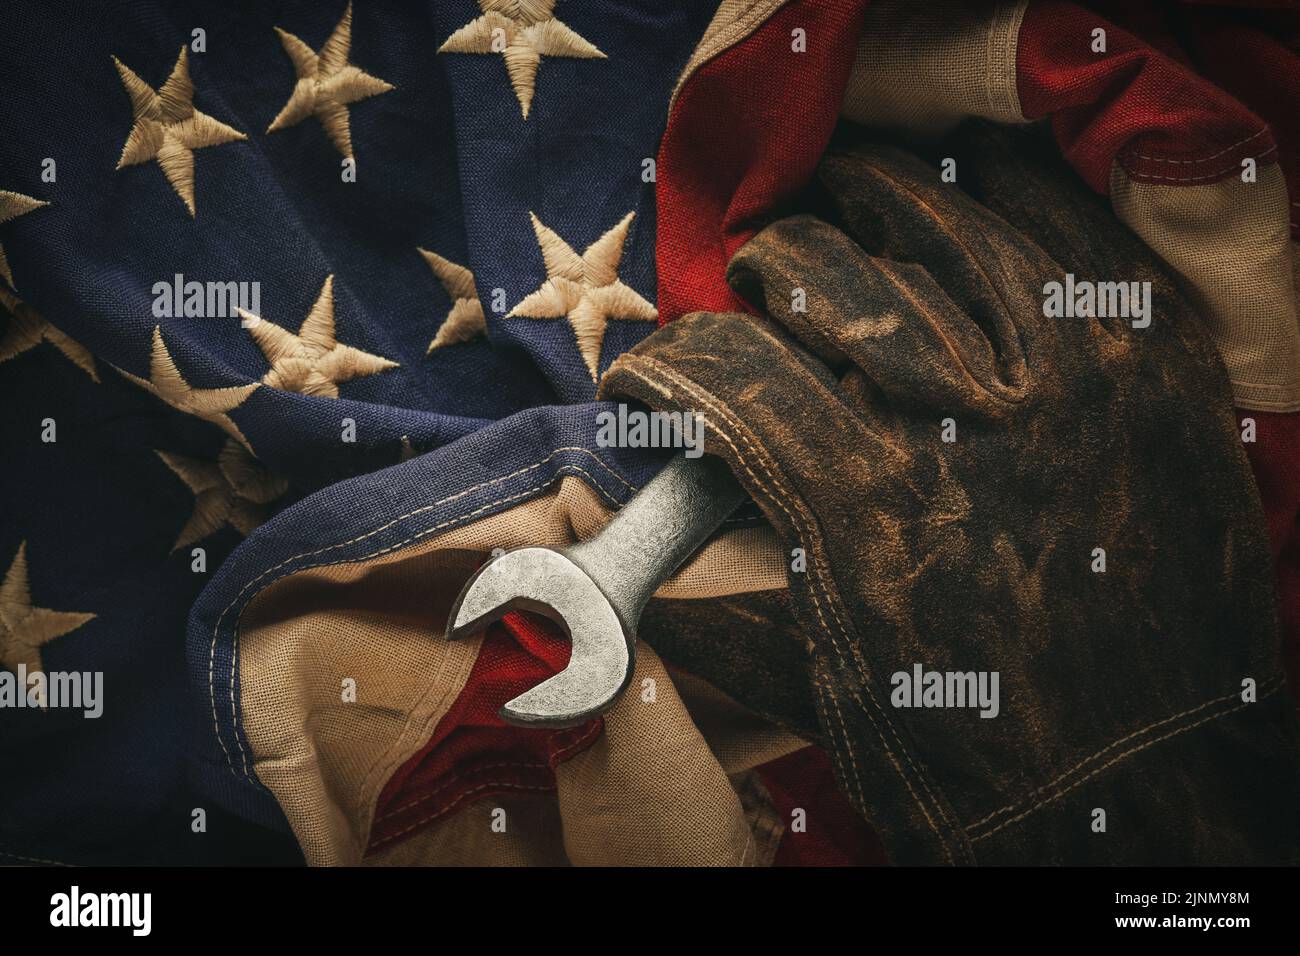 Worn work glove holding old wrench and US American flag. Made in USA, American workforce, blue collar worker, or Labor Day concept. Stock Photo